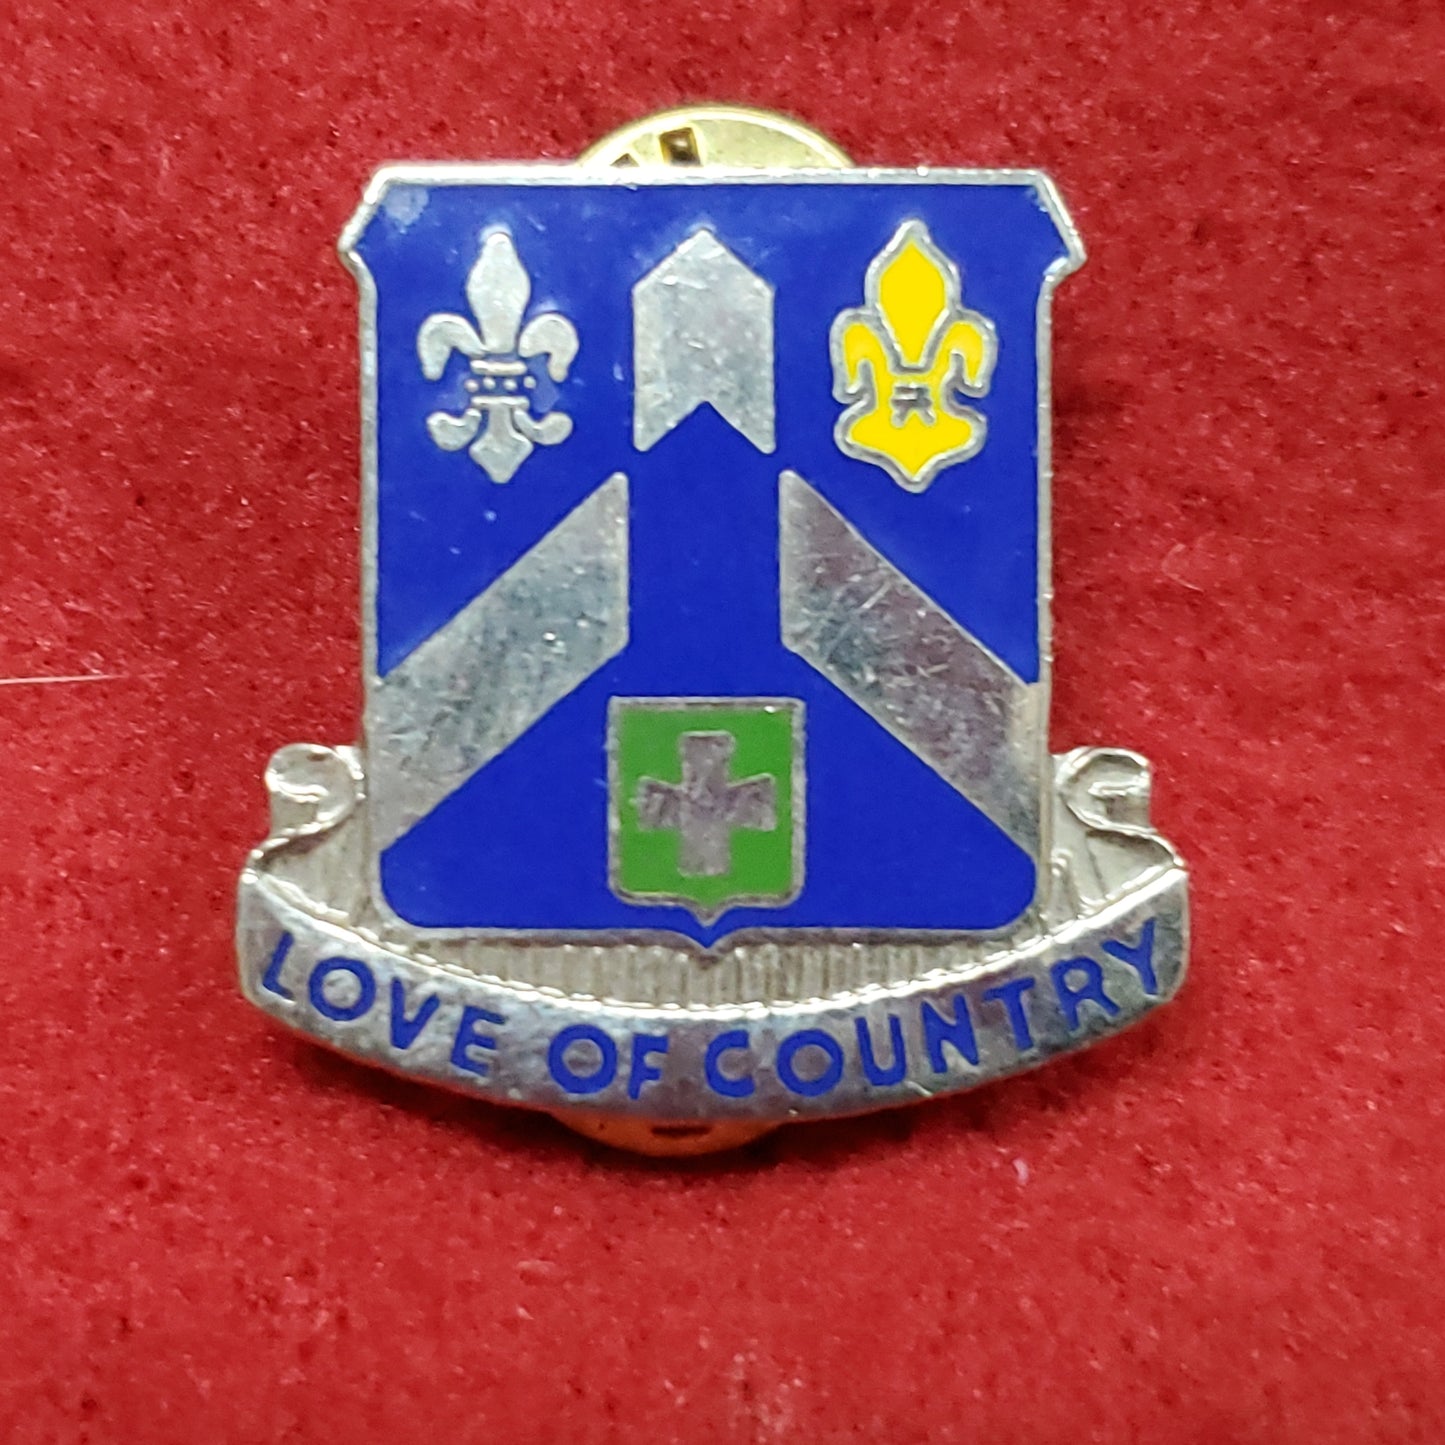 VINTAGE US 58th Infantry Regiment "LOVE OF COUNTRY" Pin Crest DUI Unit (01o136)